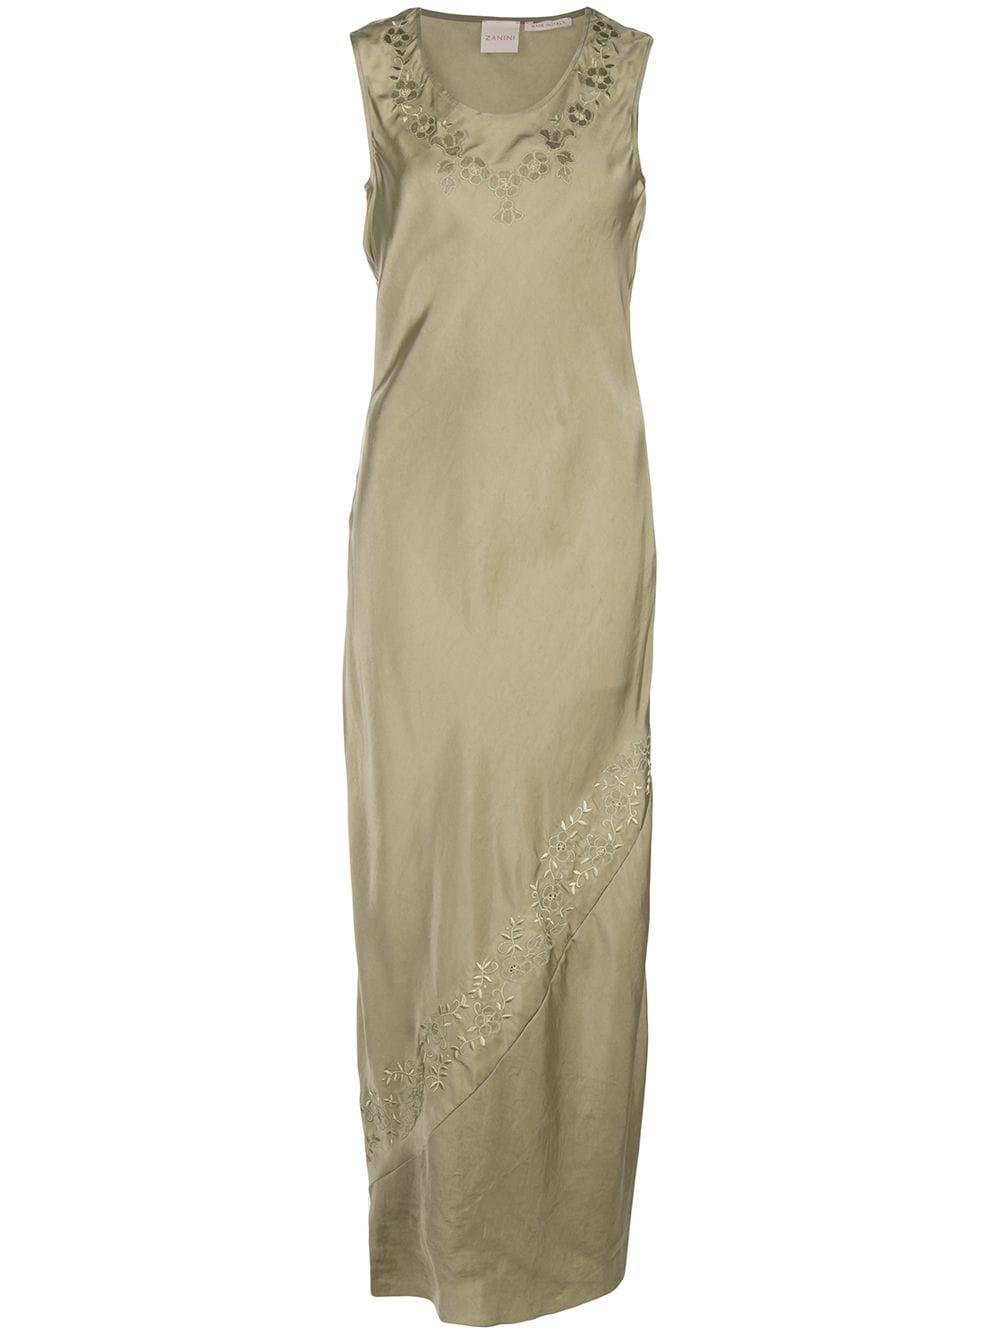 floral embroidered maxi dress by ZANINI